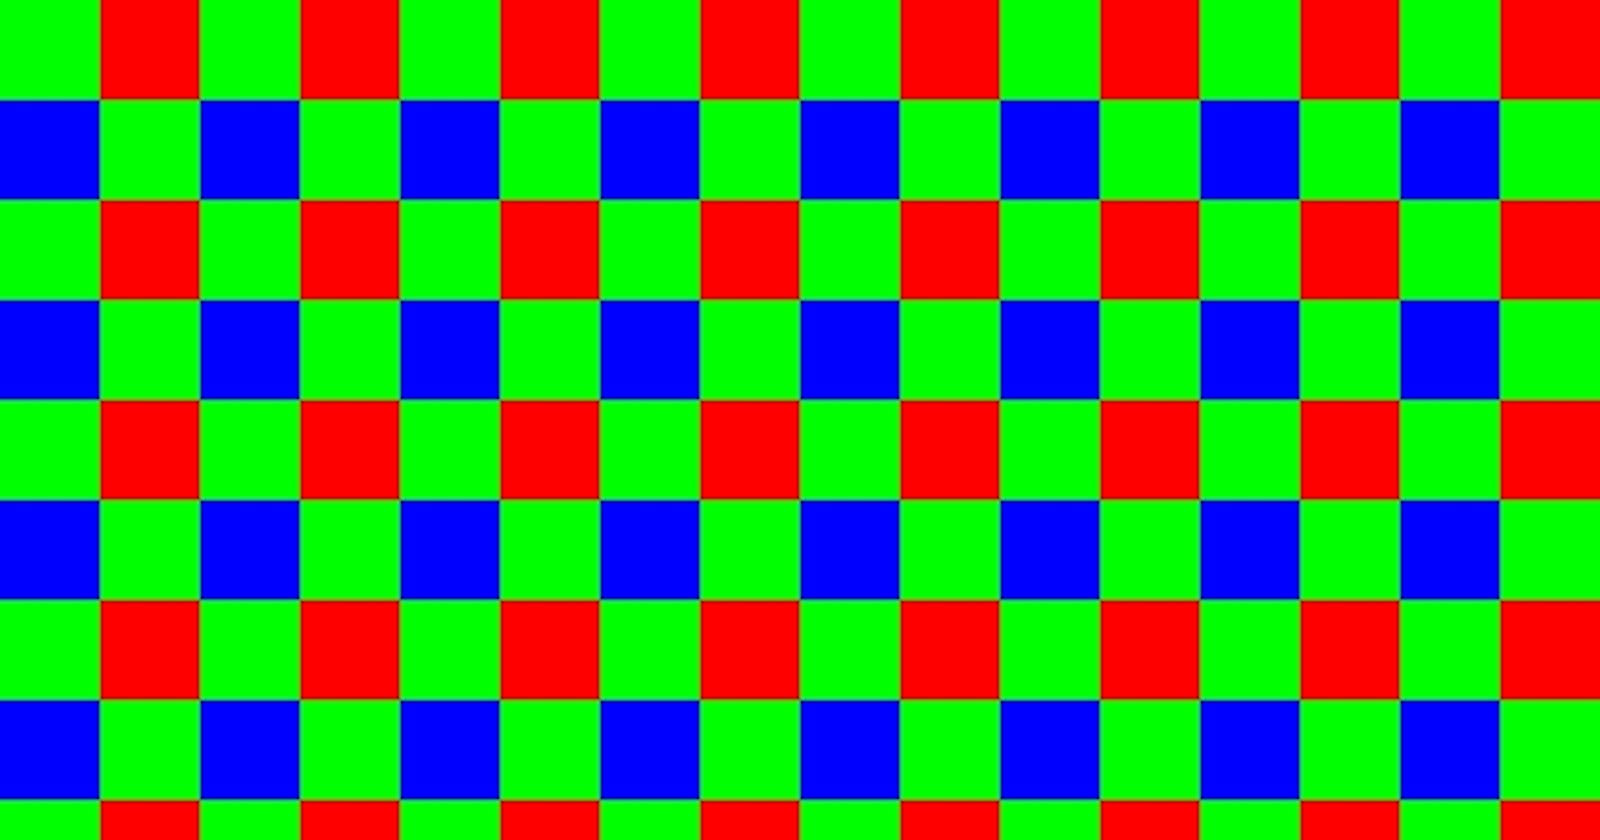 How Images are turned Into Arrays